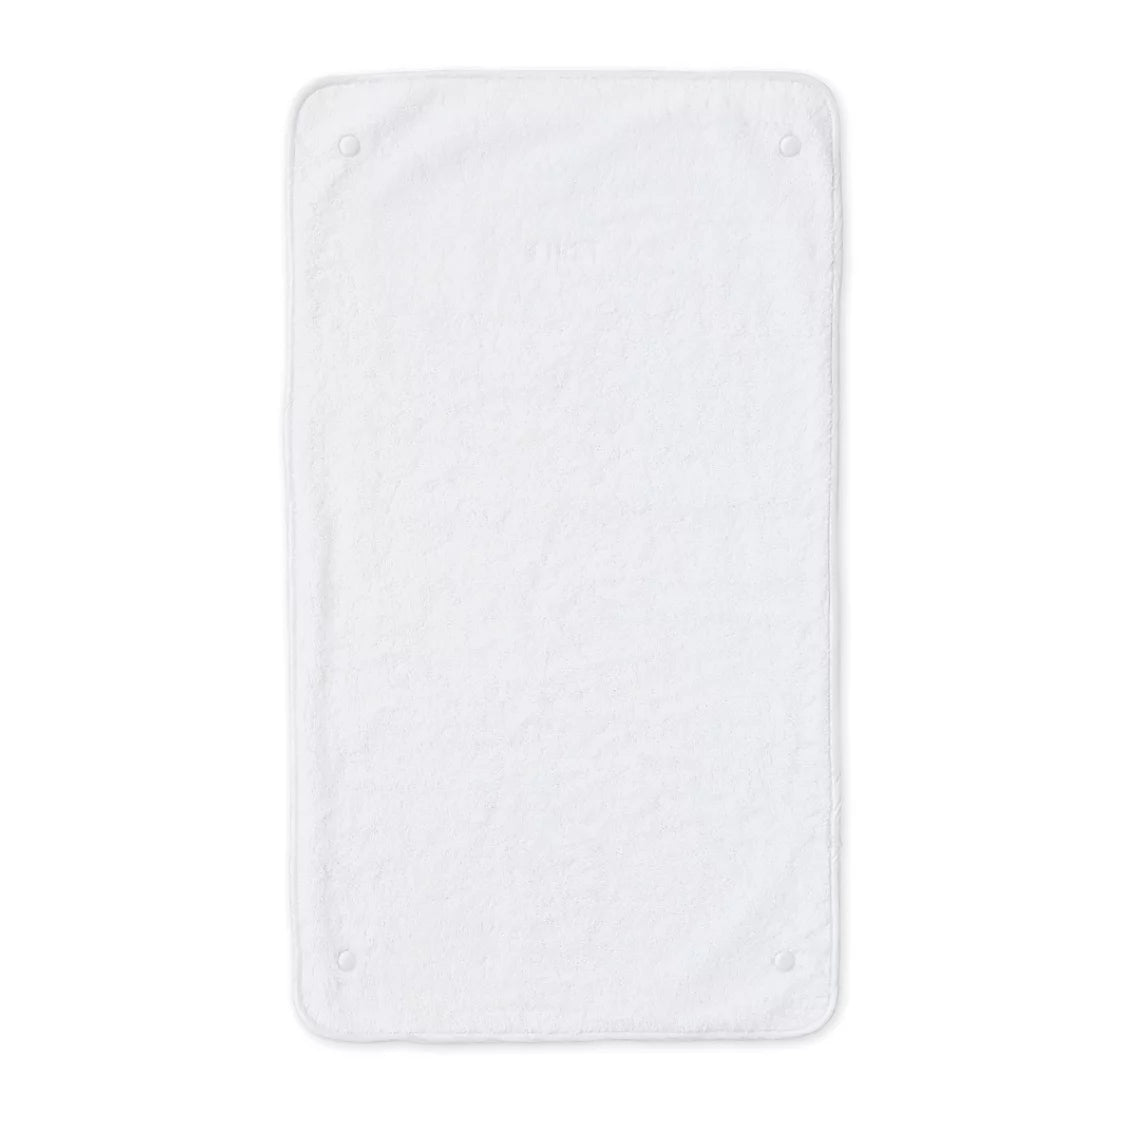 First Crystel White Changing Pad Extra Towels